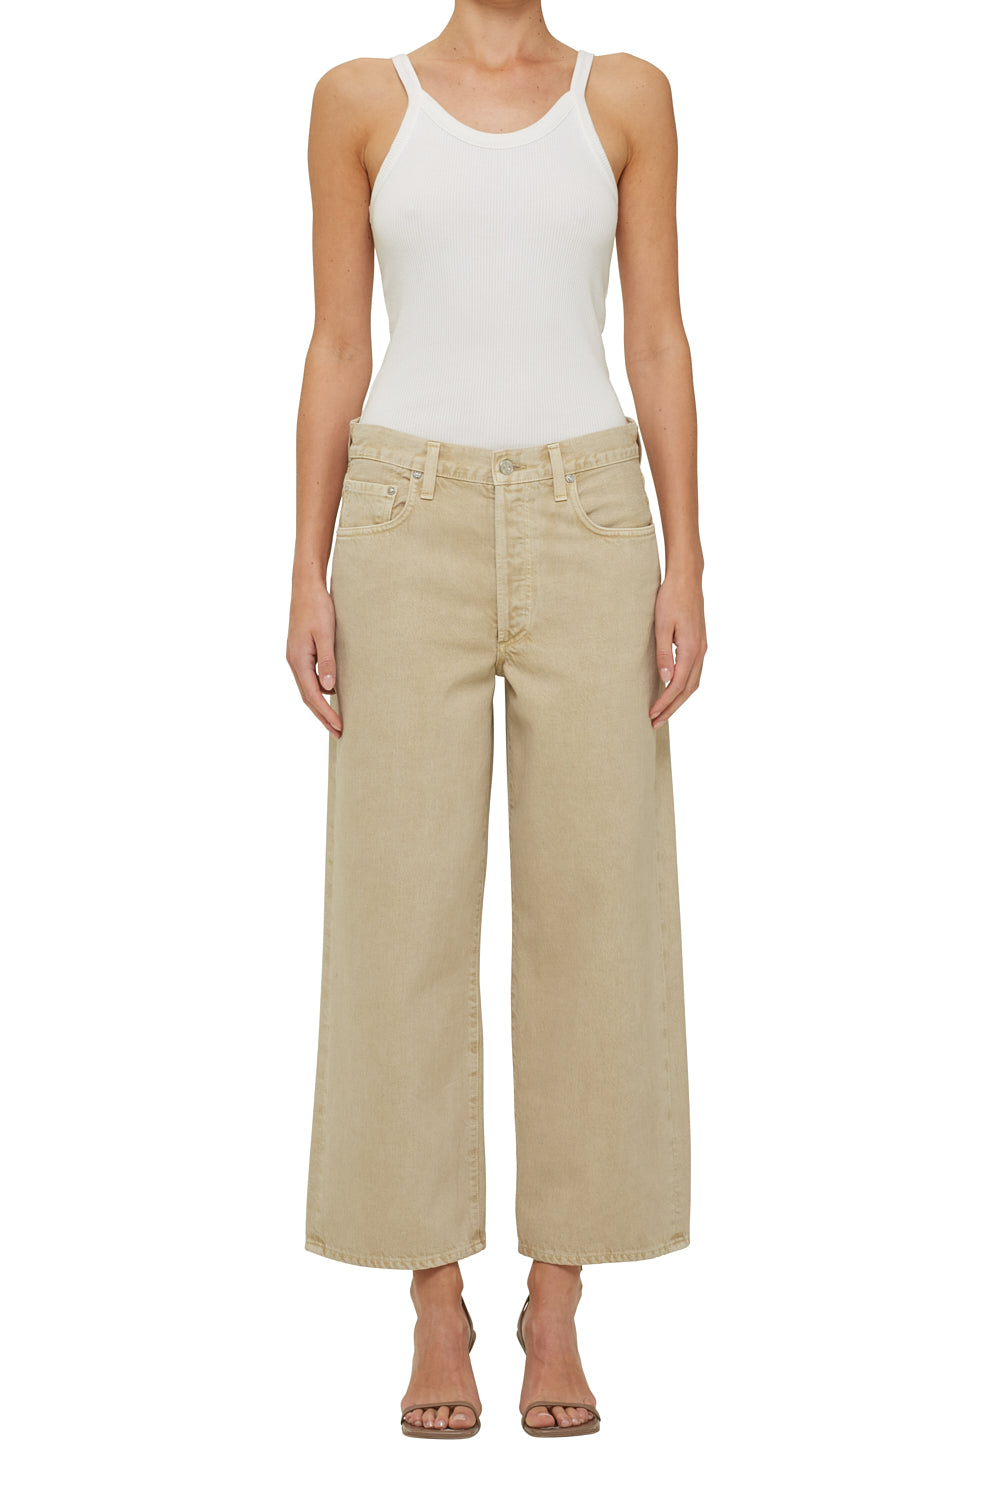 Citizens of Humanity Pina Low Rise Baggy Crop in Alfalfa